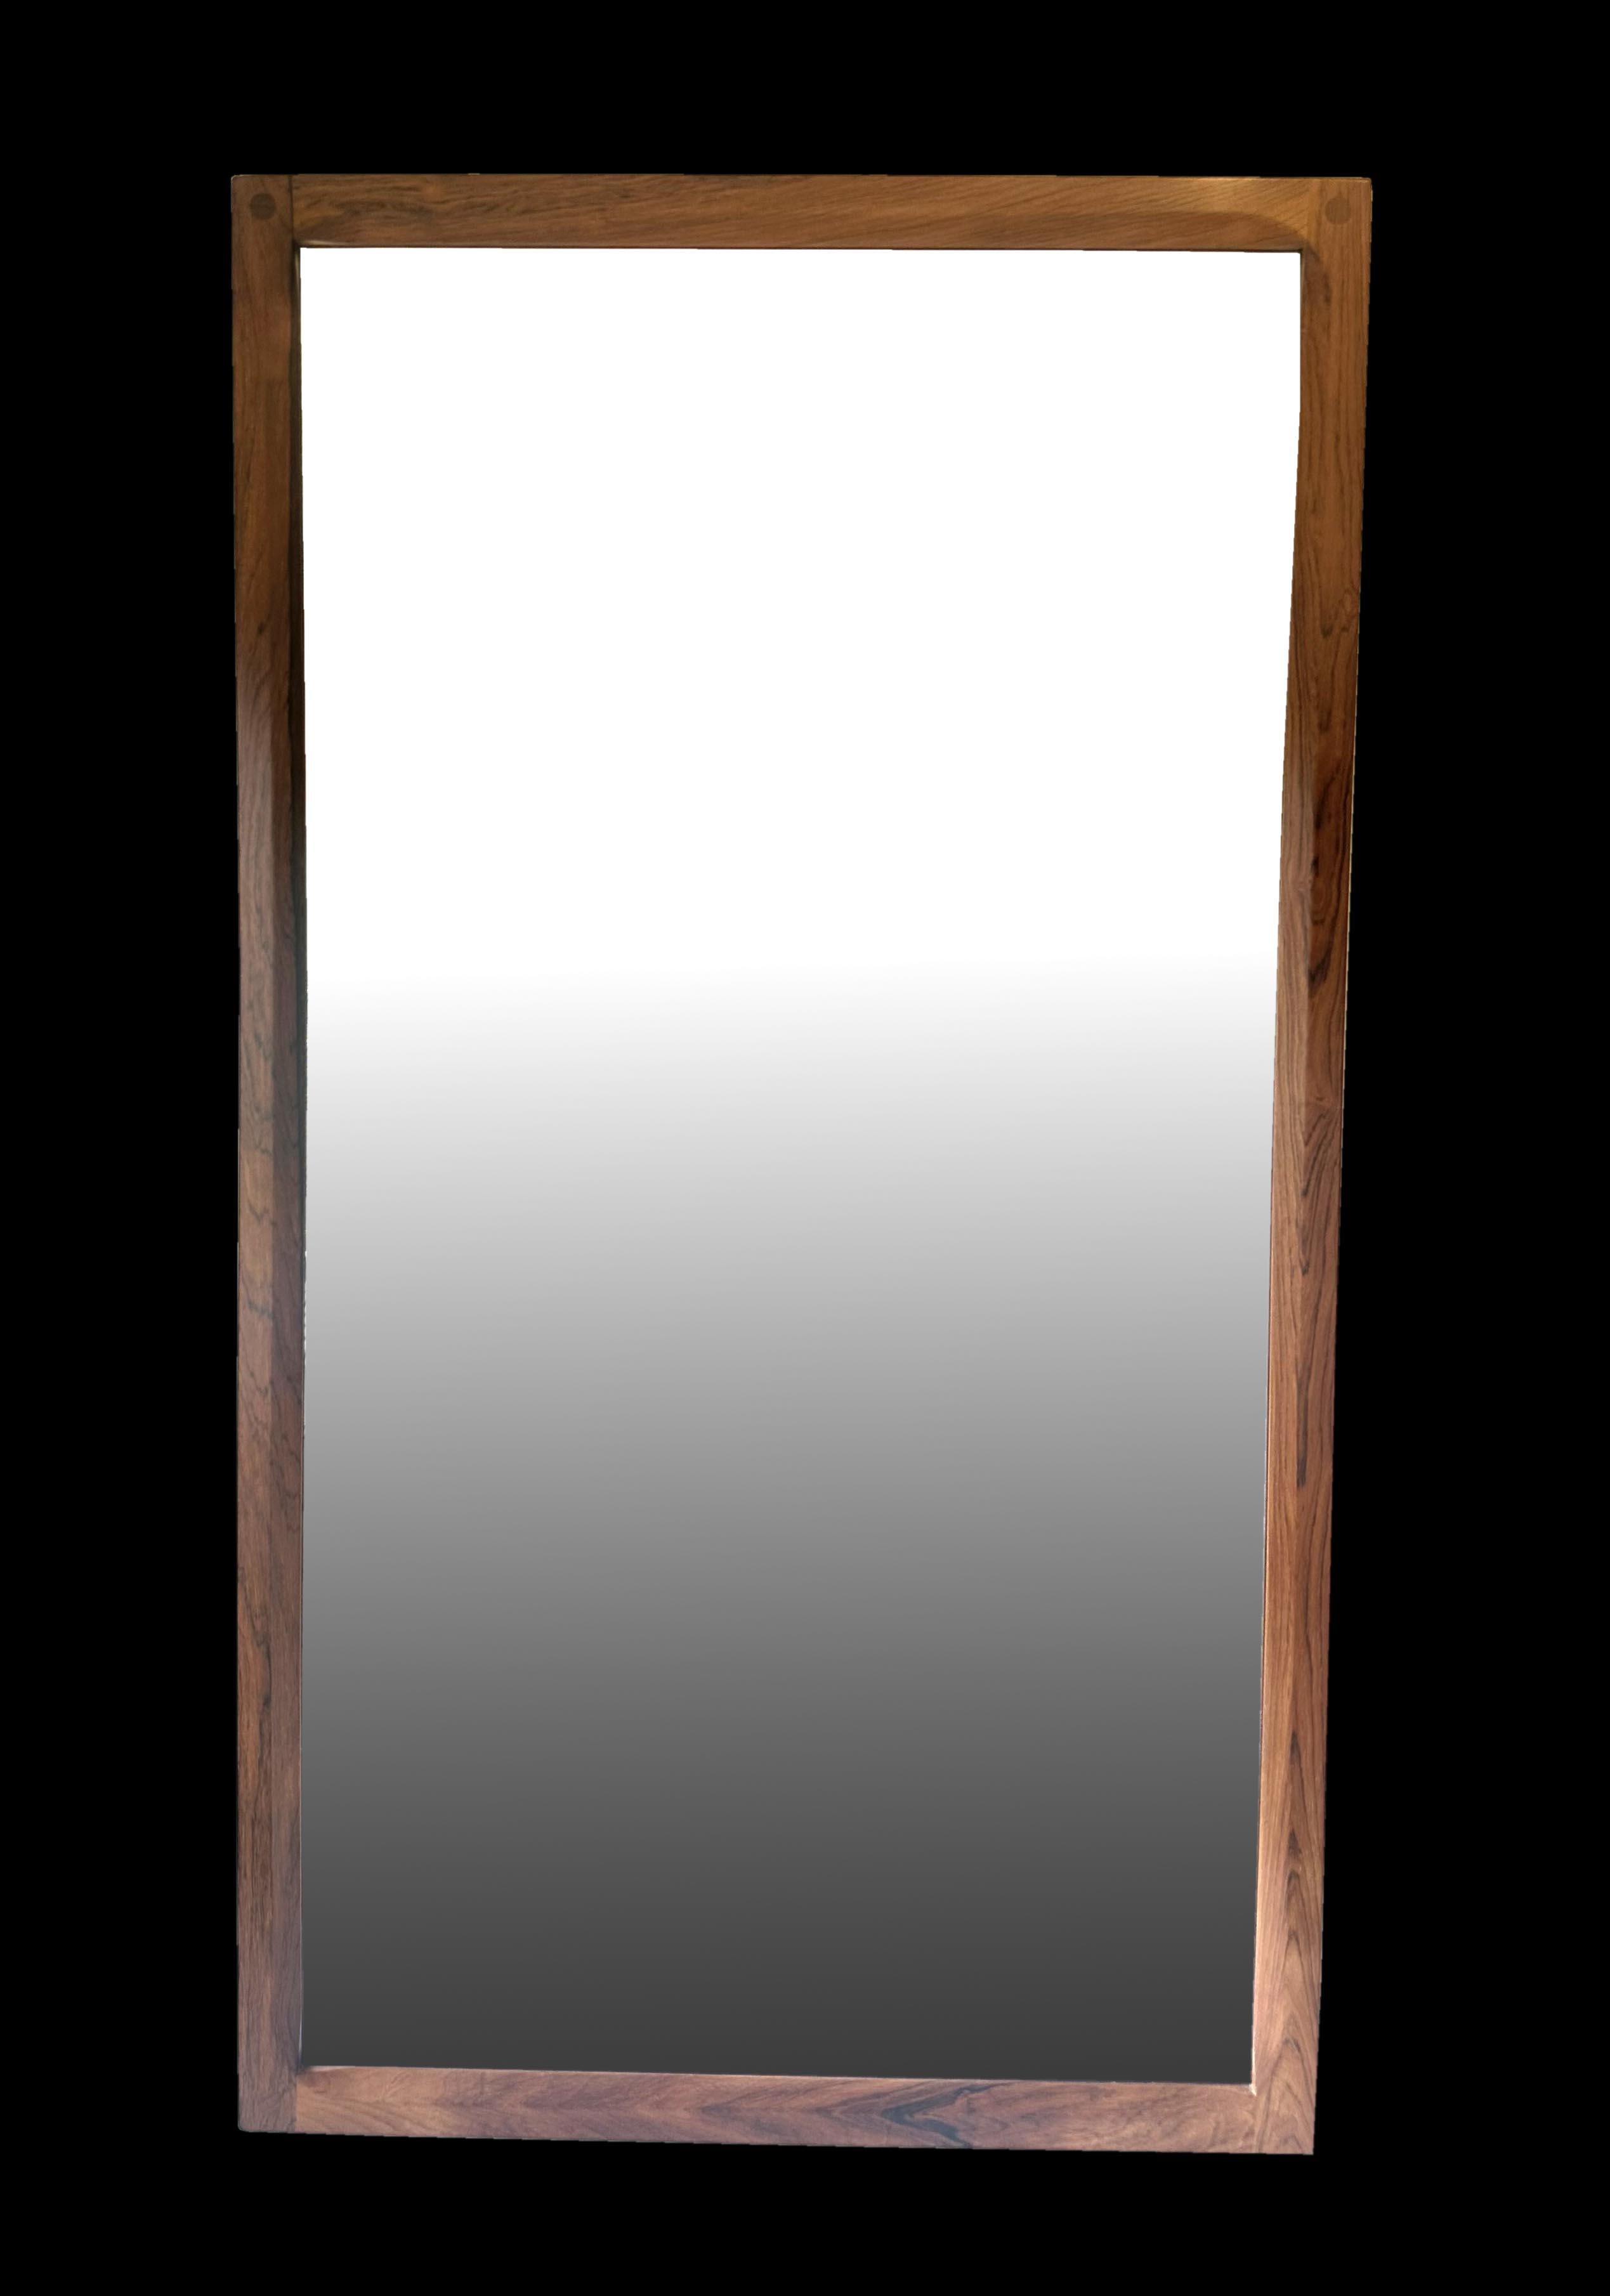 Danish Modern Rosewood Wall Mirror by Aksel Kjersgaard for Odder Mobler In Good Condition For Sale In Little Burstead, Essex